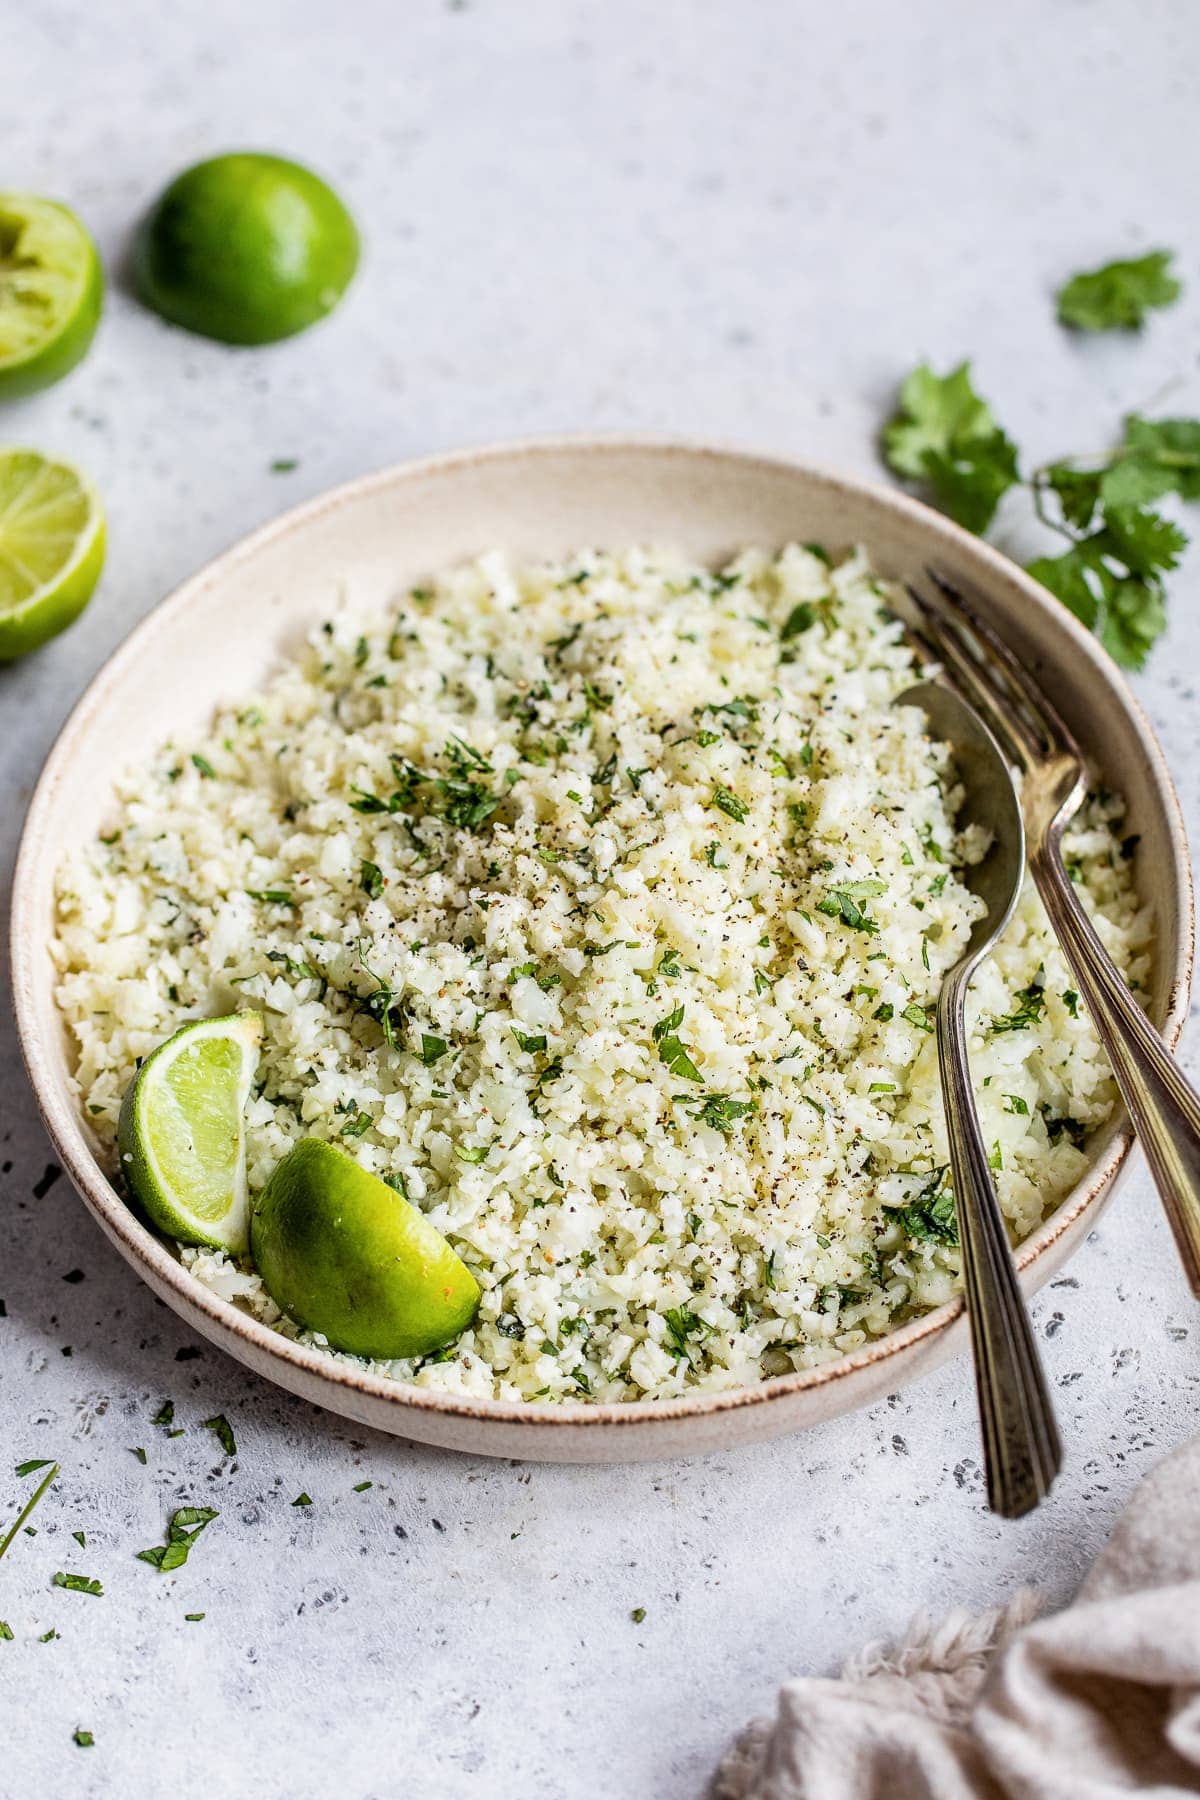 A bowl of cilantro lime cauliflower rice on a table next to fresh limes.